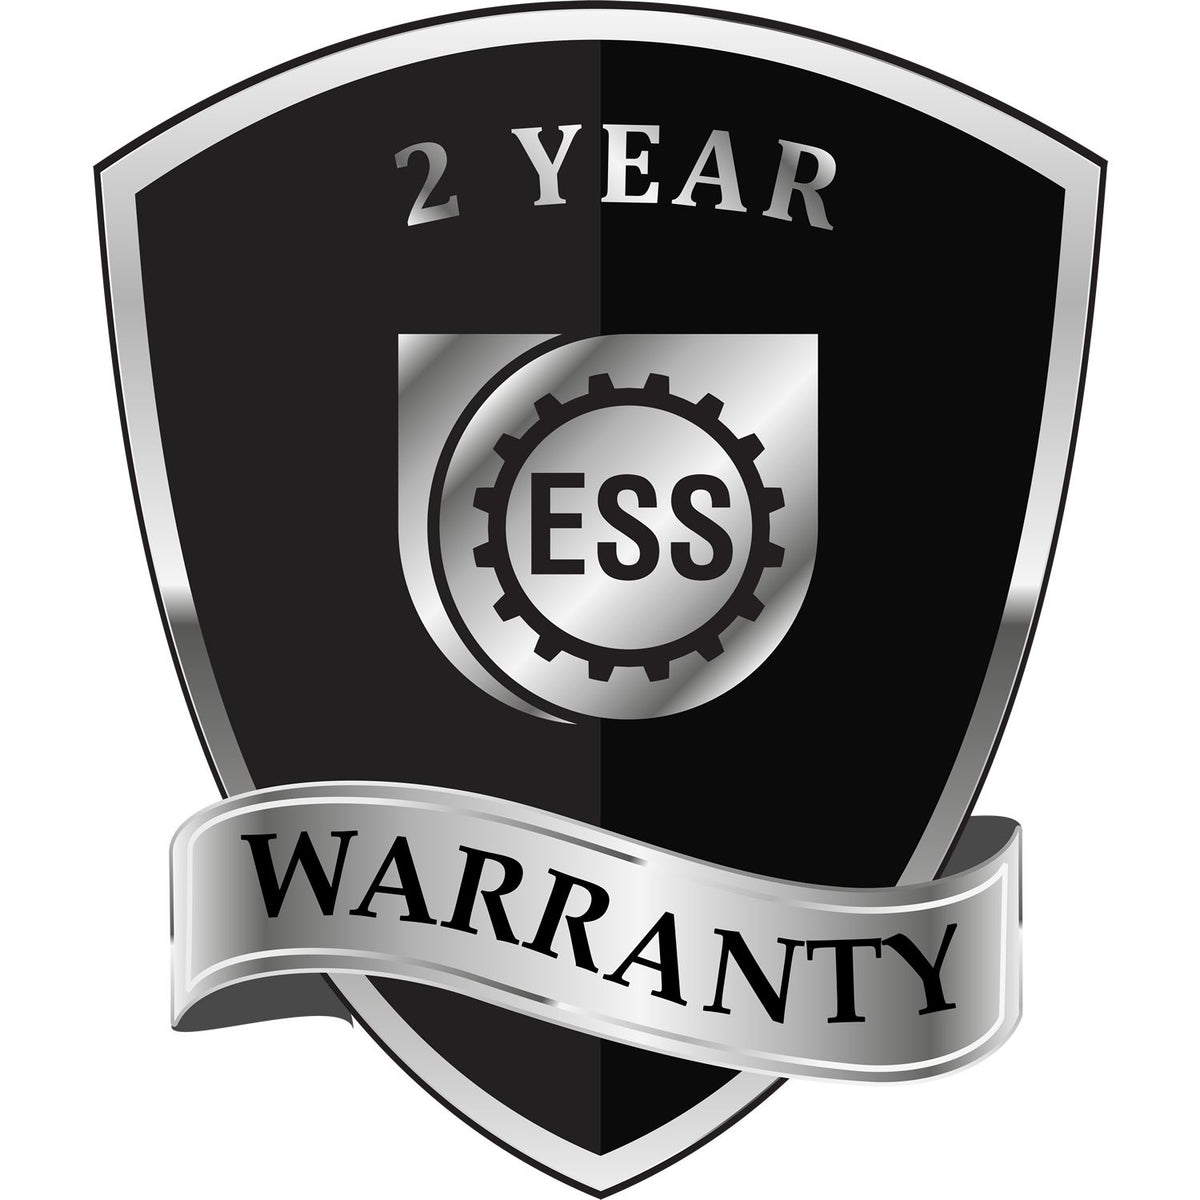 A black and silver badge or emblem showing warranty information for the Hybrid South Carolina Geologist Seal